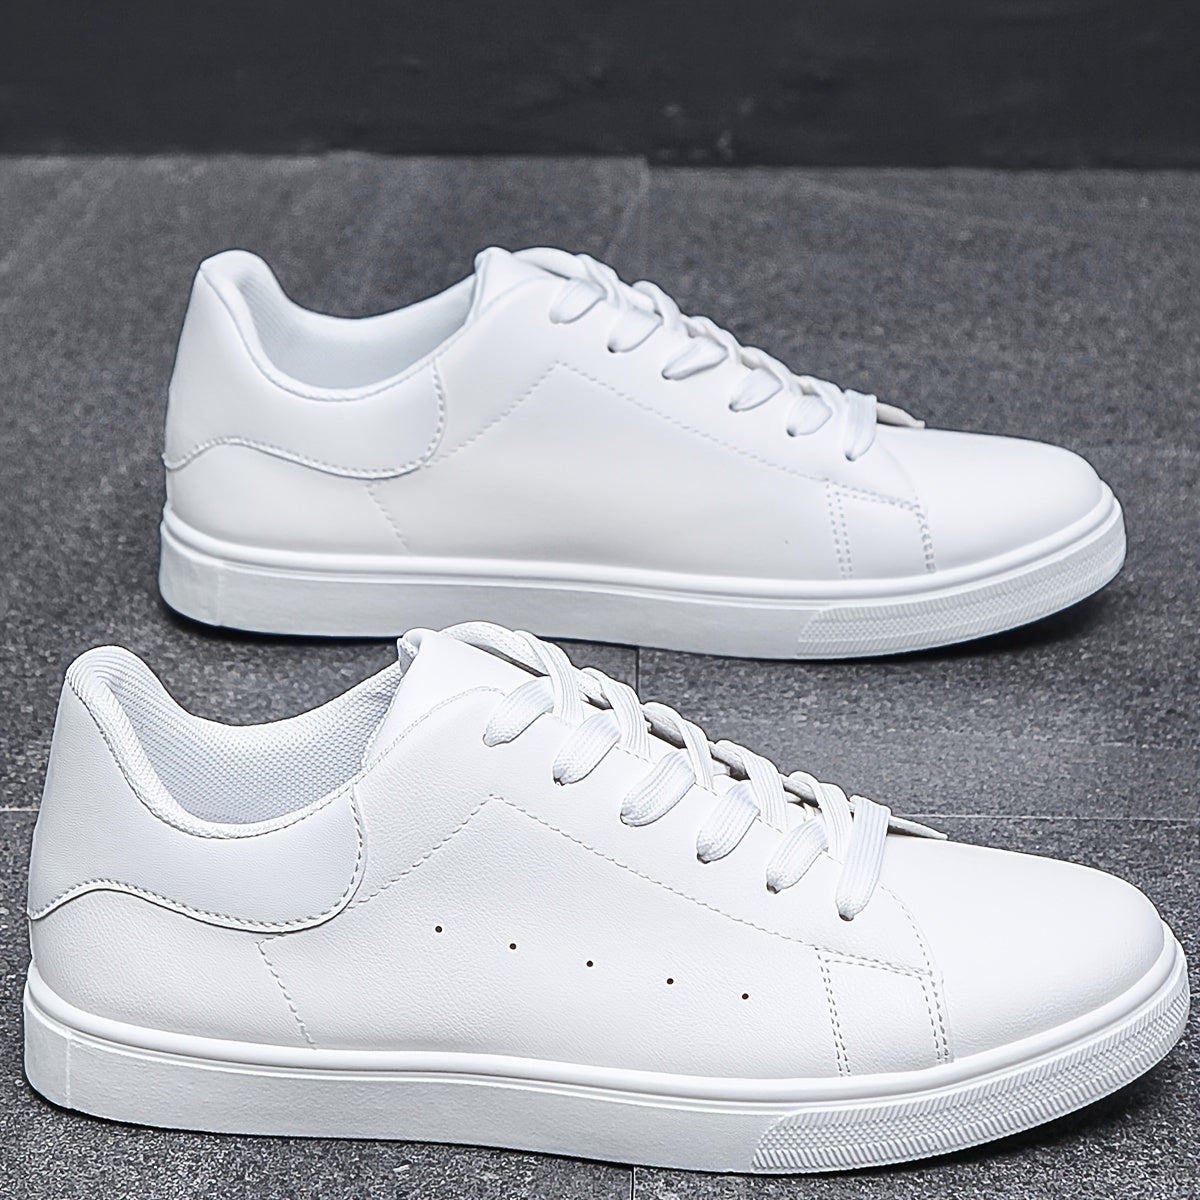 Men's PU Leather Lace-up Skate Sneakers